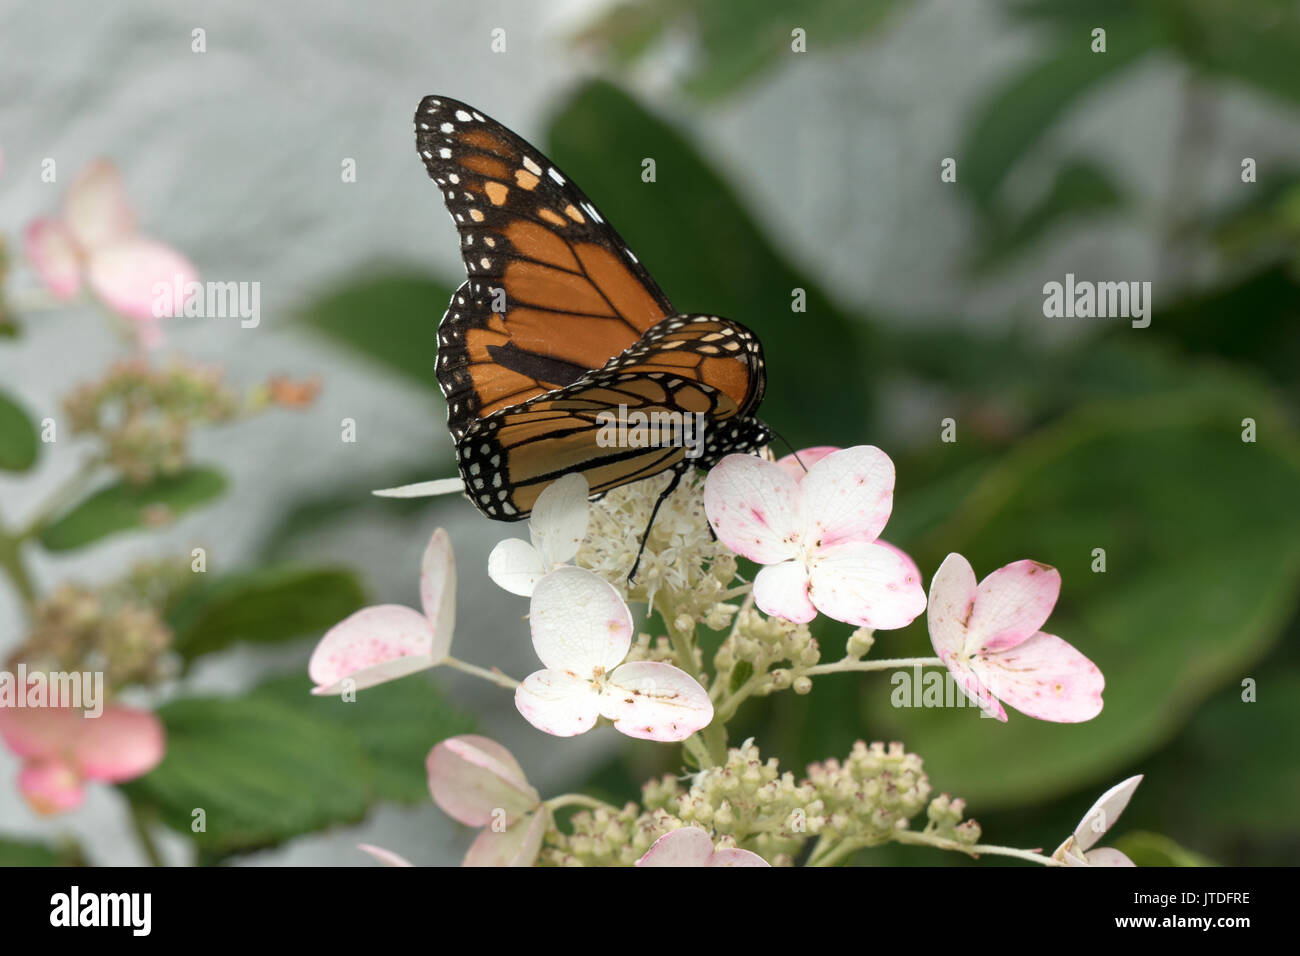 Beautiful Monarch Butterfly Perched On Lacecap Hydrangea 403 Stock Photo